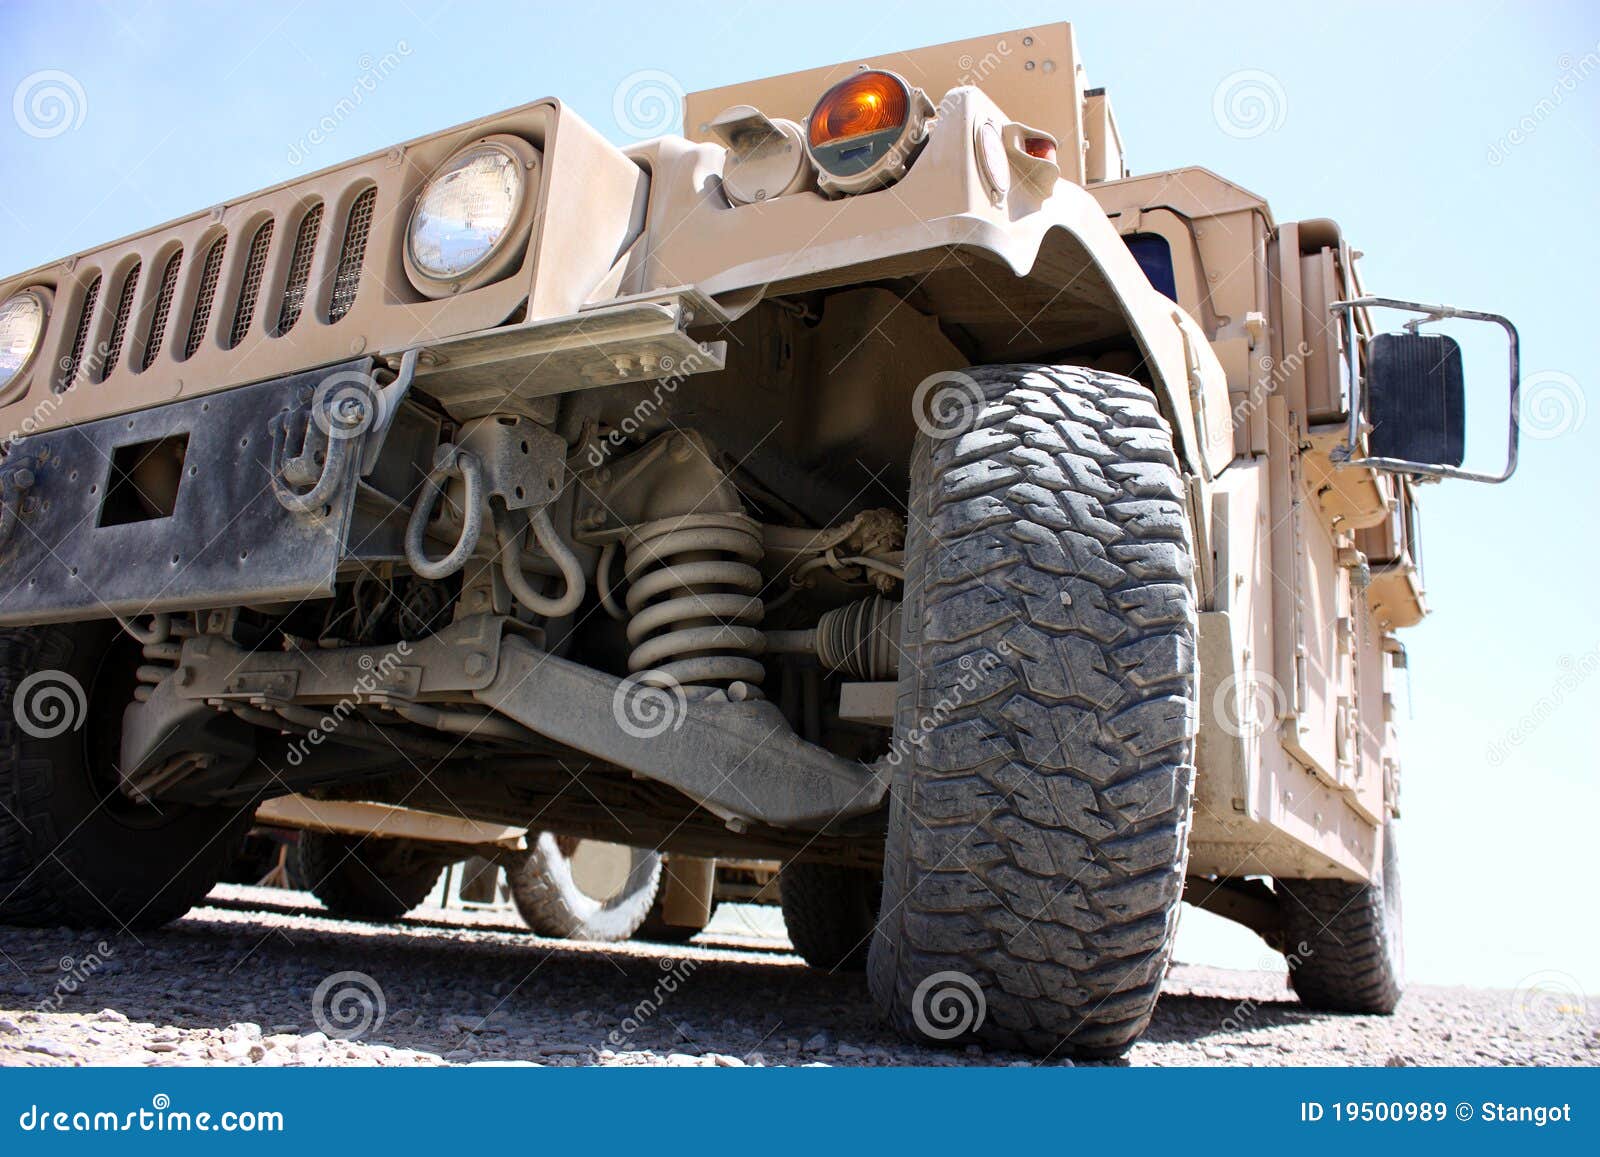 military armored vehicle